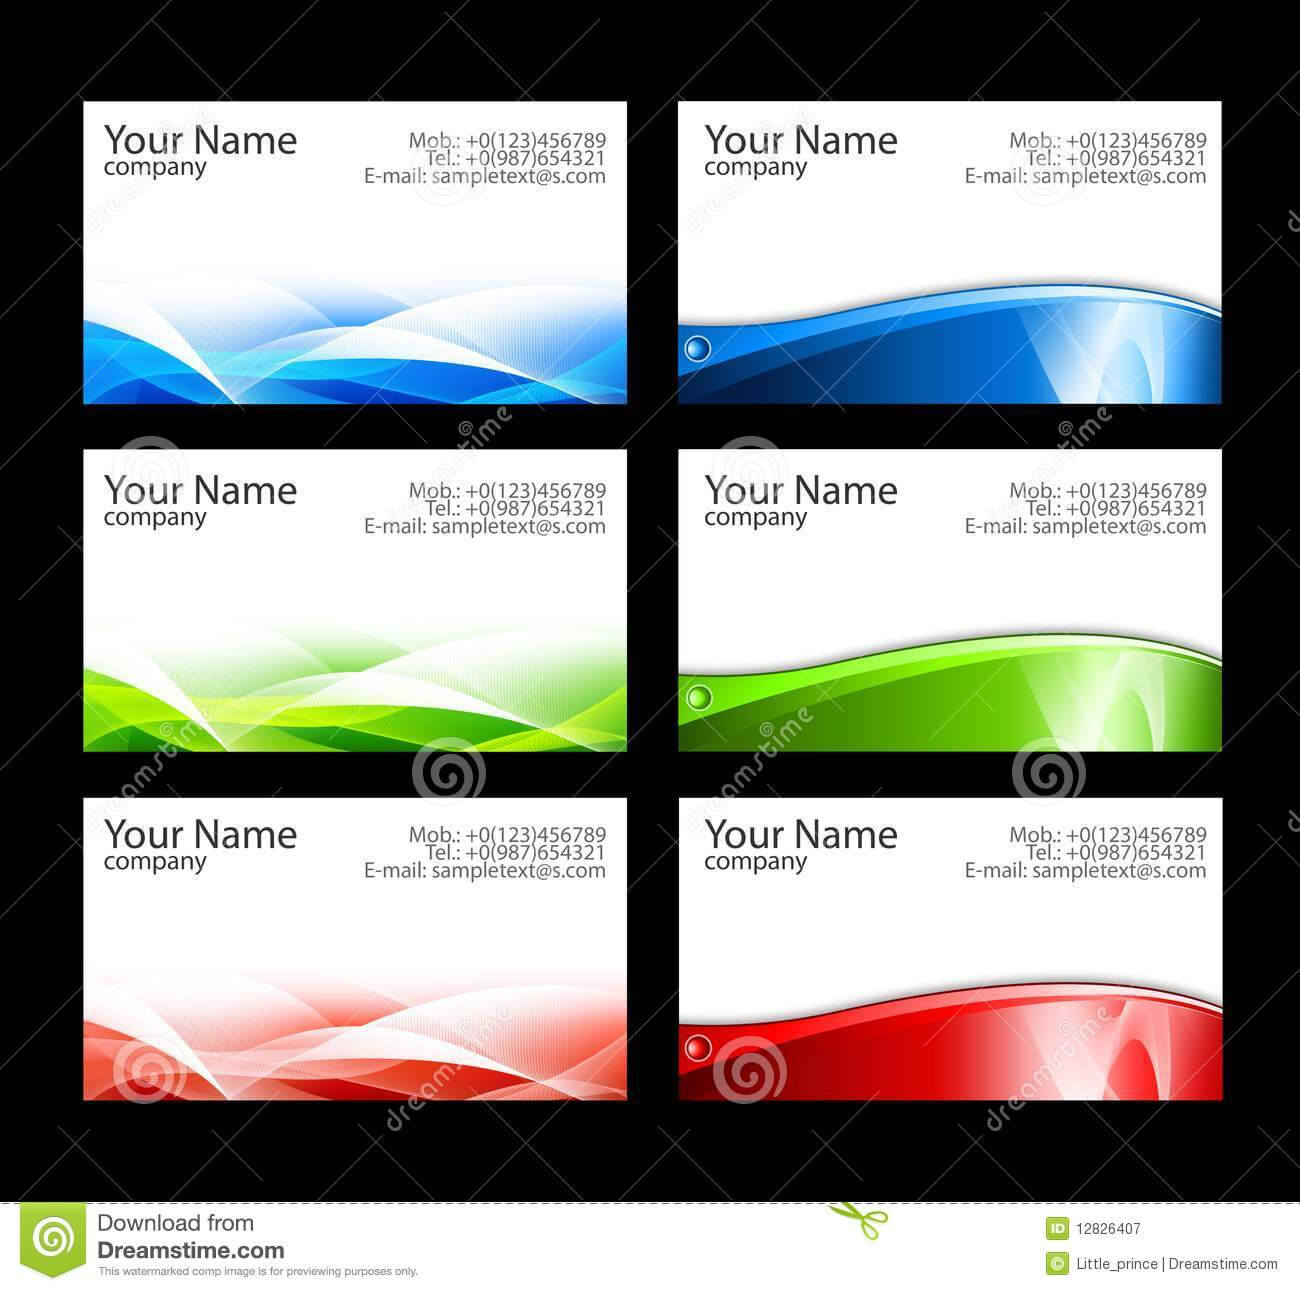 Business Cards Templates Stock Illustration. Illustration Of Pertaining To Free Business Cards Templates For Word